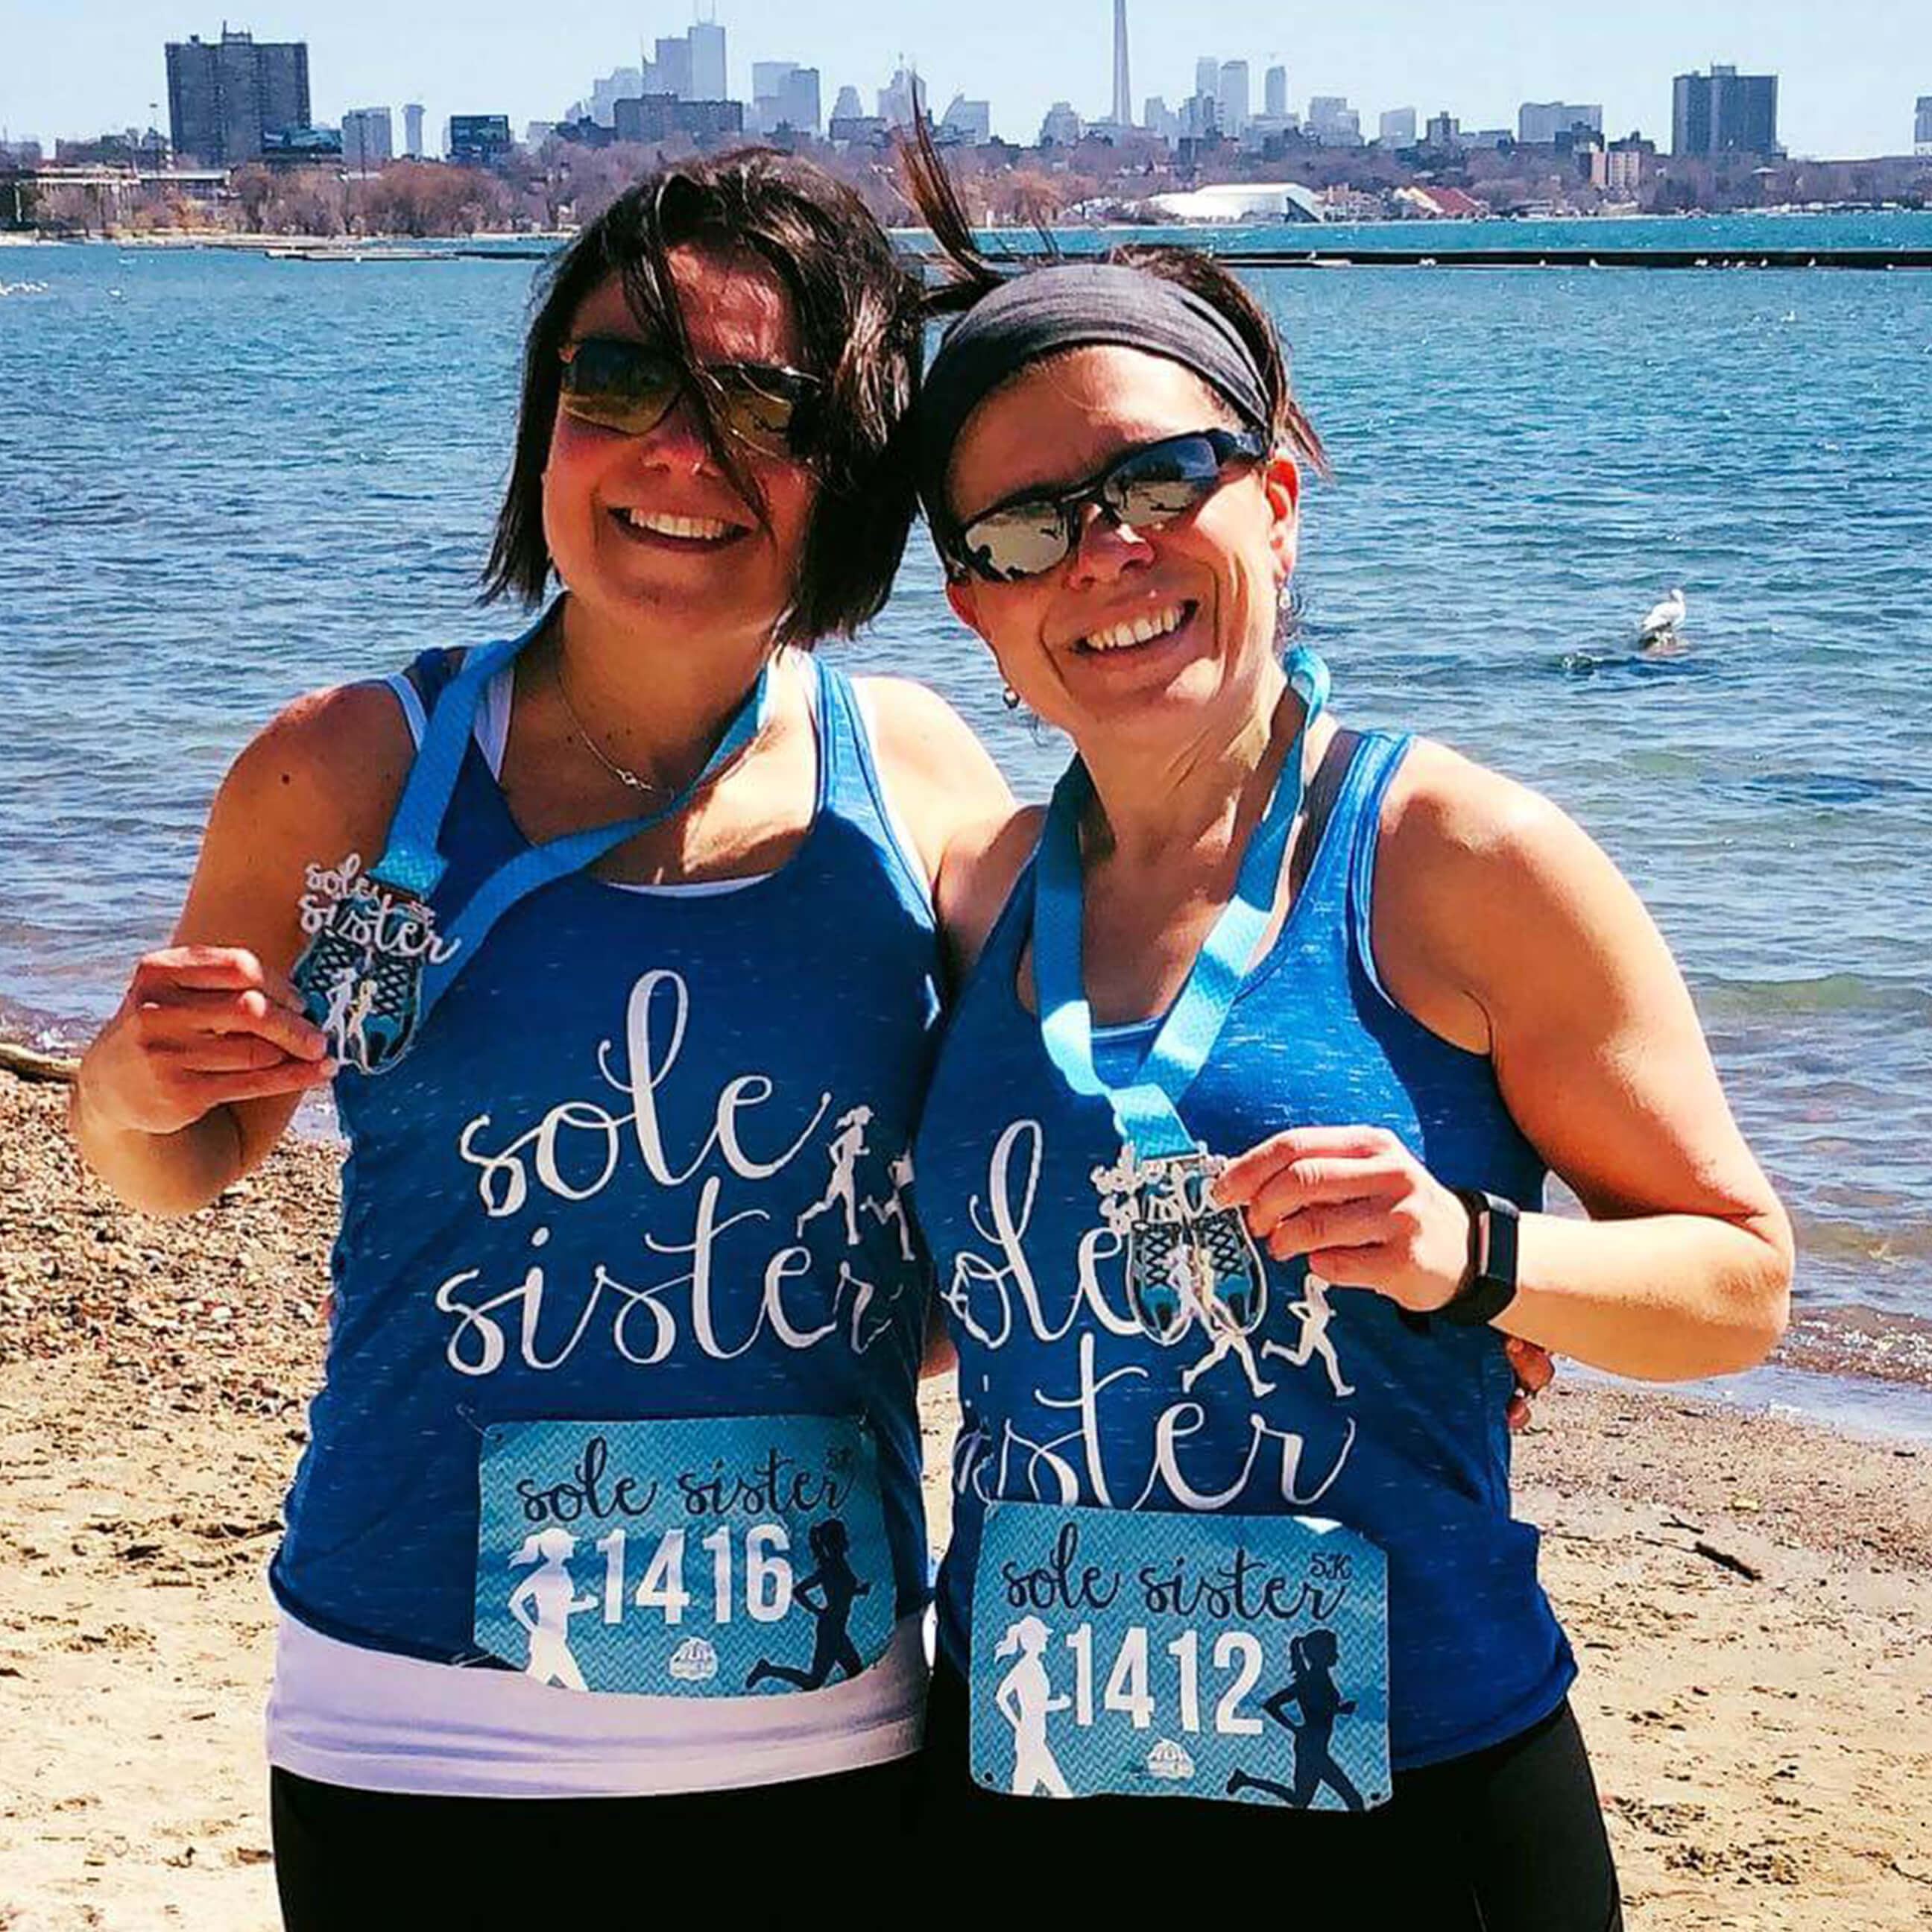 Sole Sister Virtual Race runners